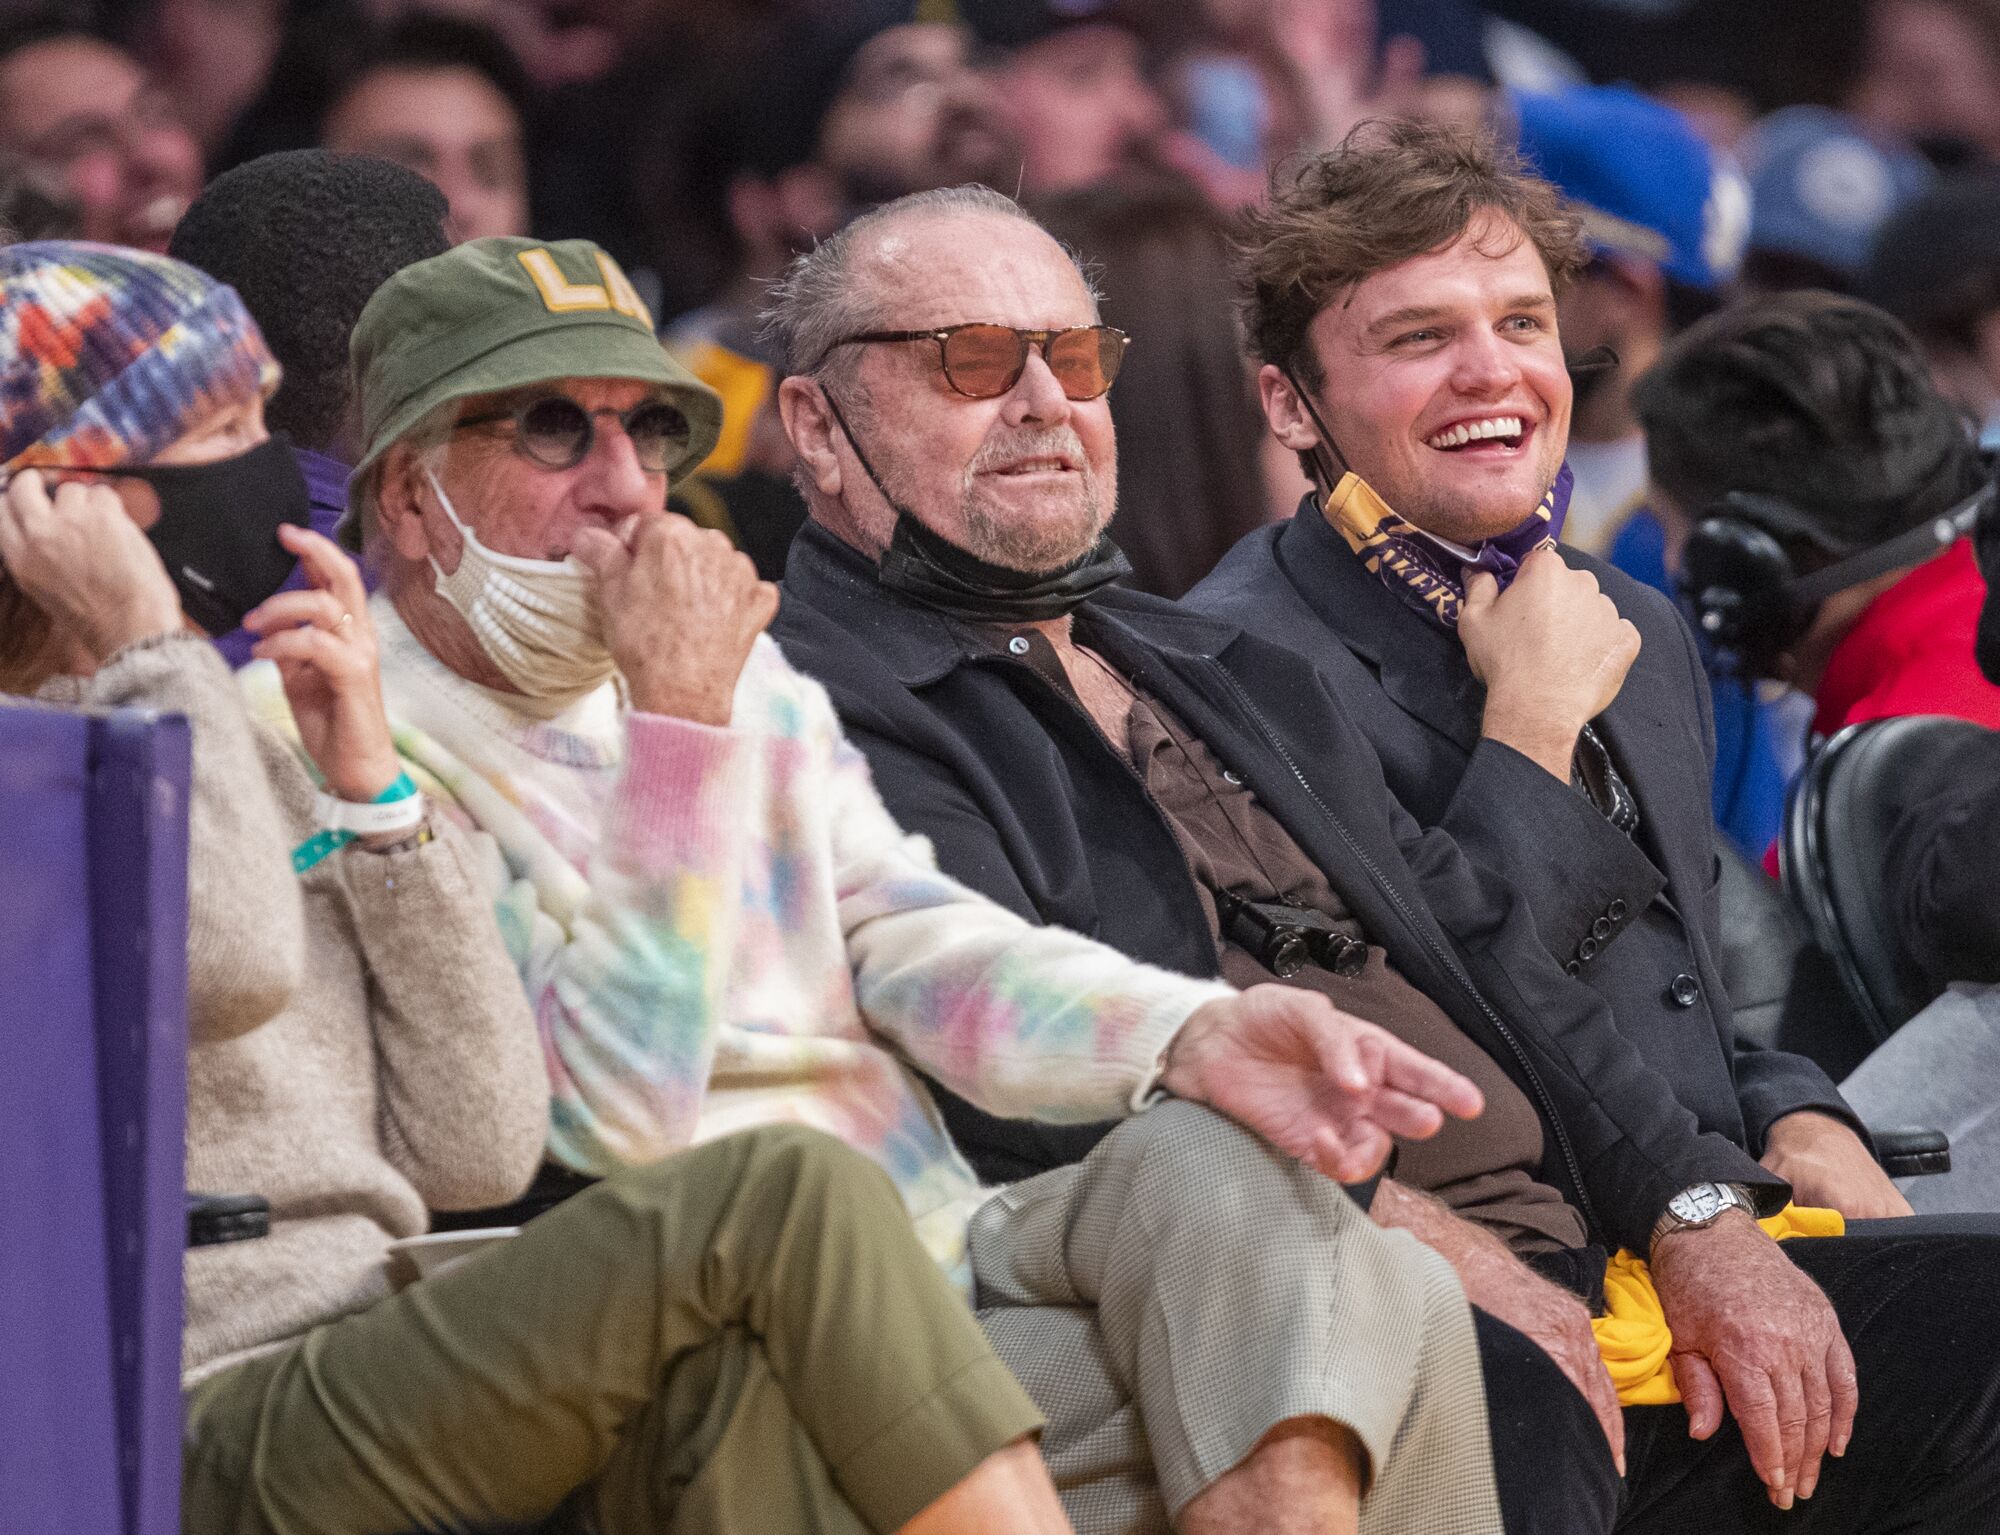 Jack Nicholson watches the game with his son Ray.